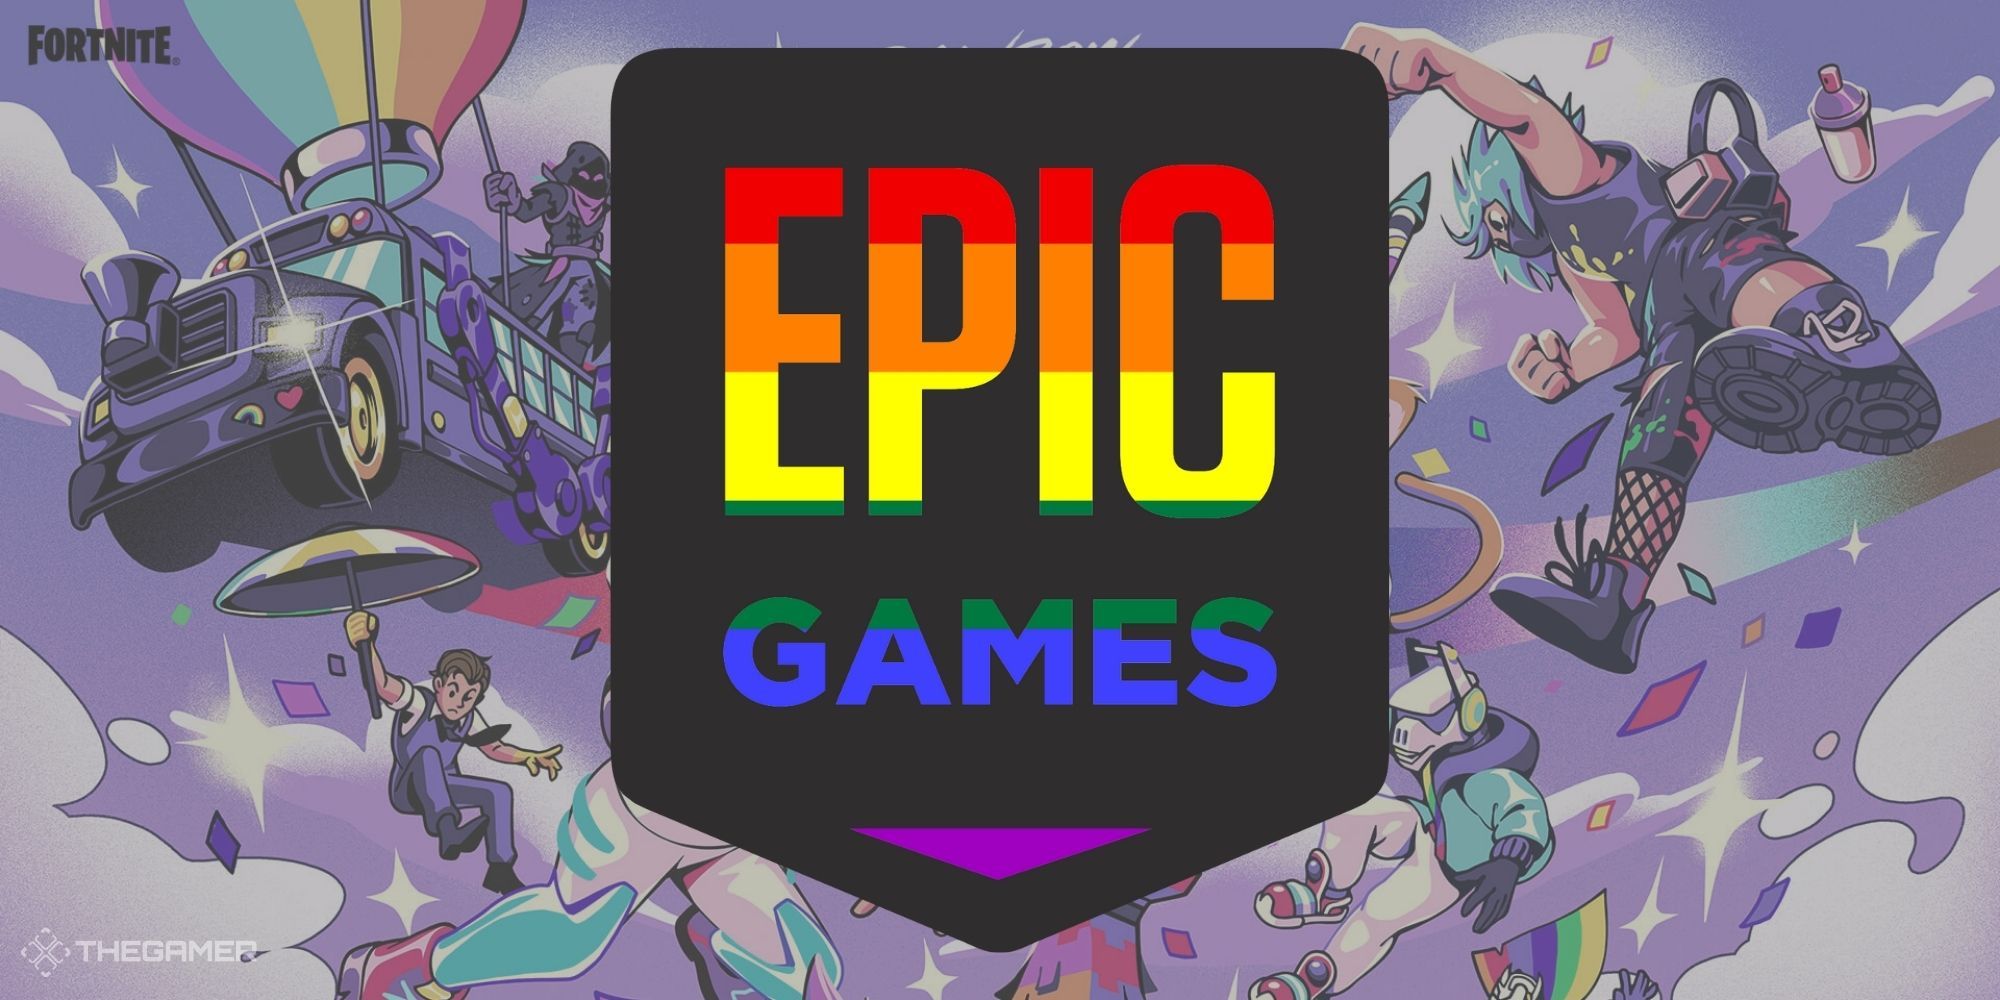 Epic Games Privacy Policy - Epic Games